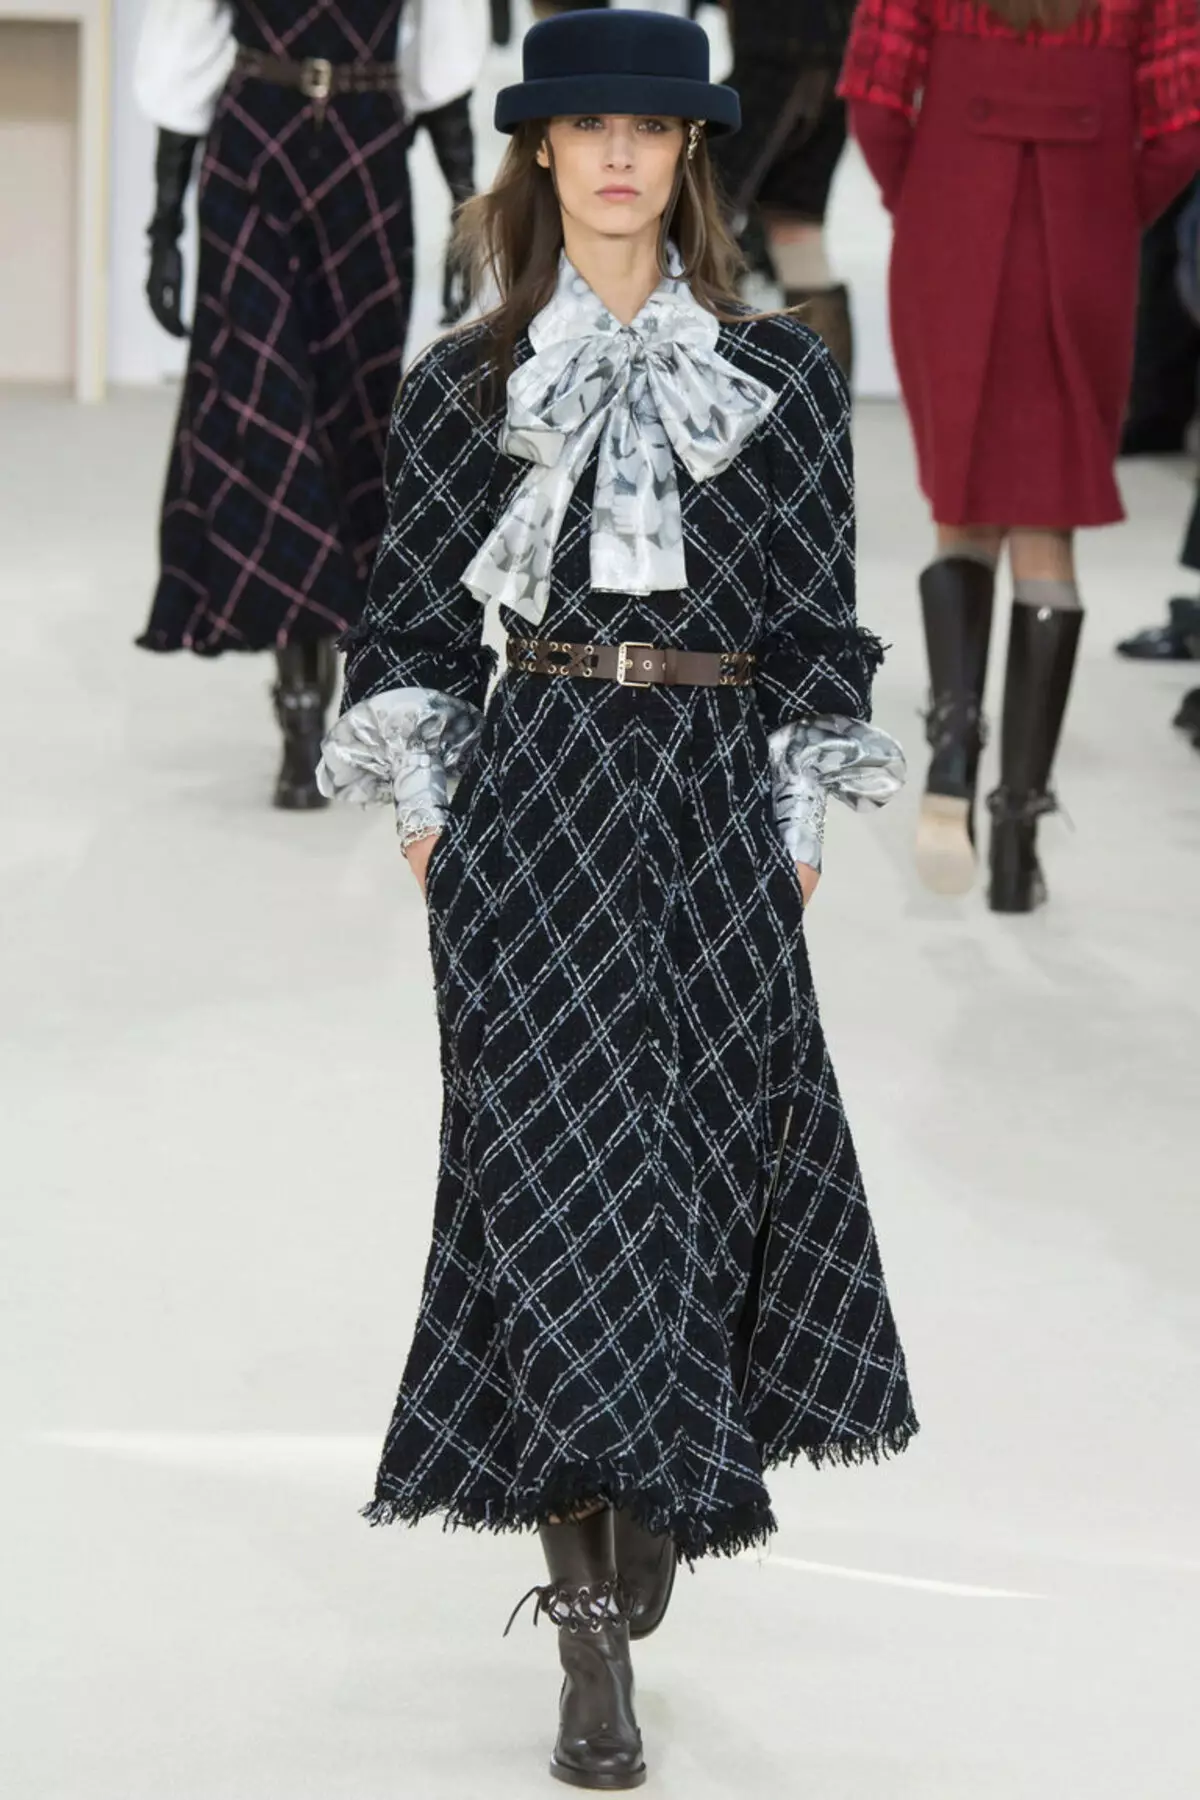 Woolen dress in a cage from Chanel